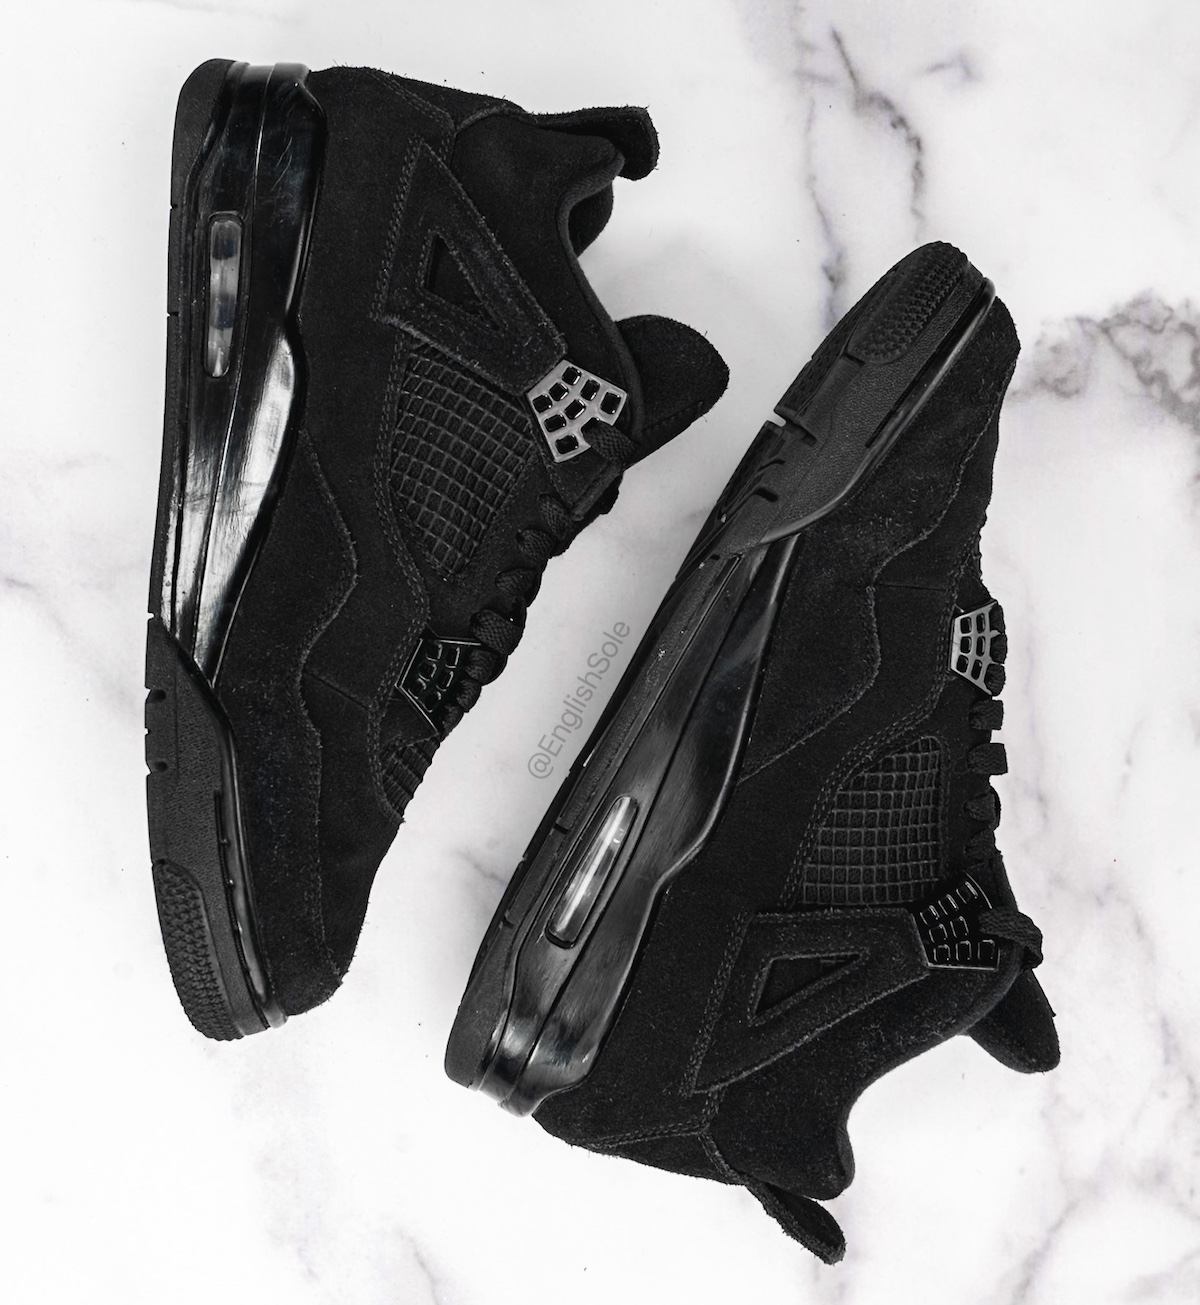 Air Jordan 4 SB Black Cat – Air Jordan 4 SB Black Cat – first look